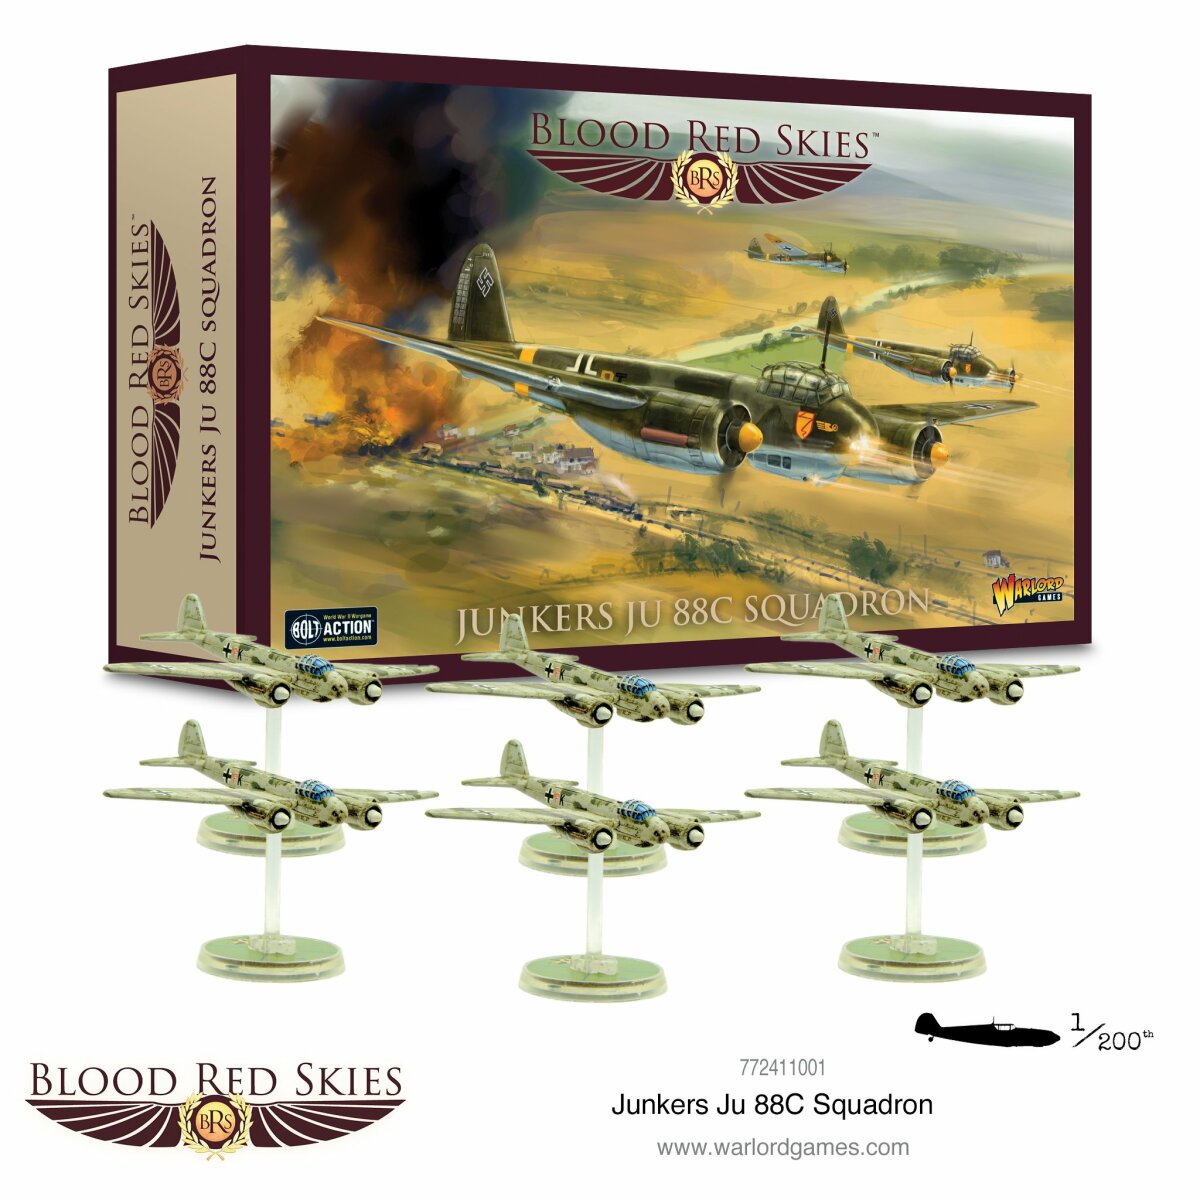 Warlord Games Blood Red Skies American ACE Pilot George Preddy Englisch USA